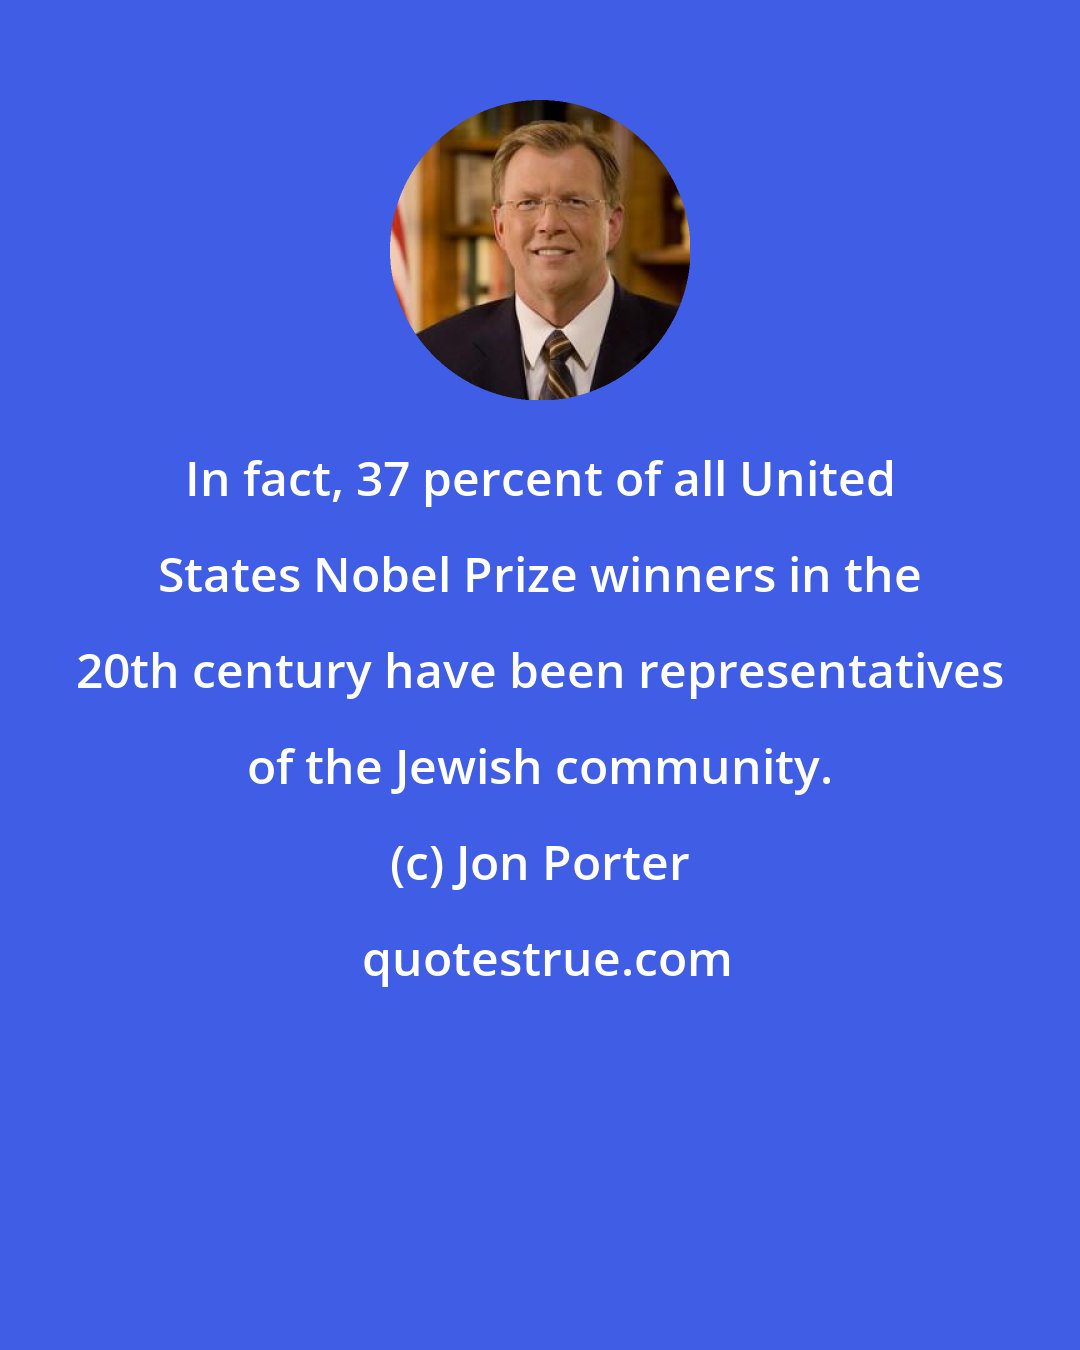 Jon Porter: In fact, 37 percent of all United States Nobel Prize winners in the 20th century have been representatives of the Jewish community.